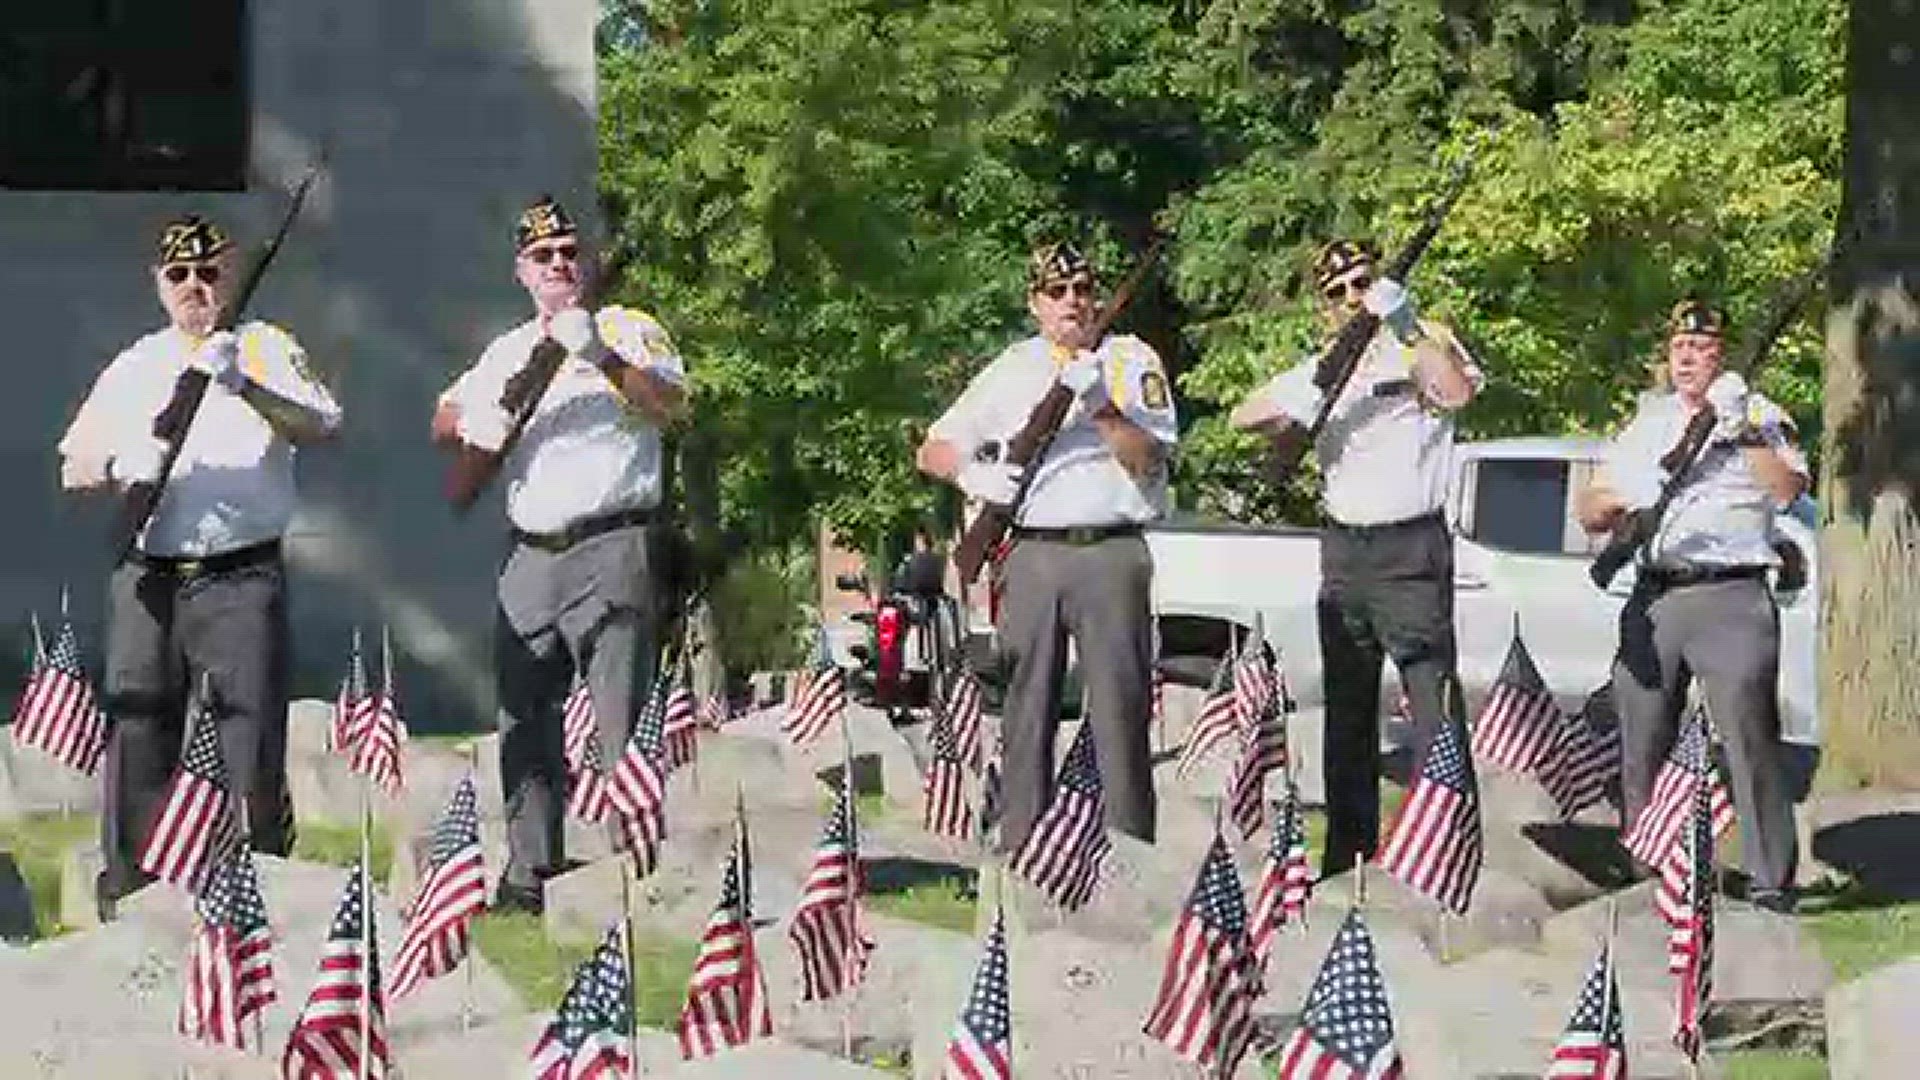 Taps is played at the Memorial Day service held at Forest Lawn Cemetery in Buffalo, NY